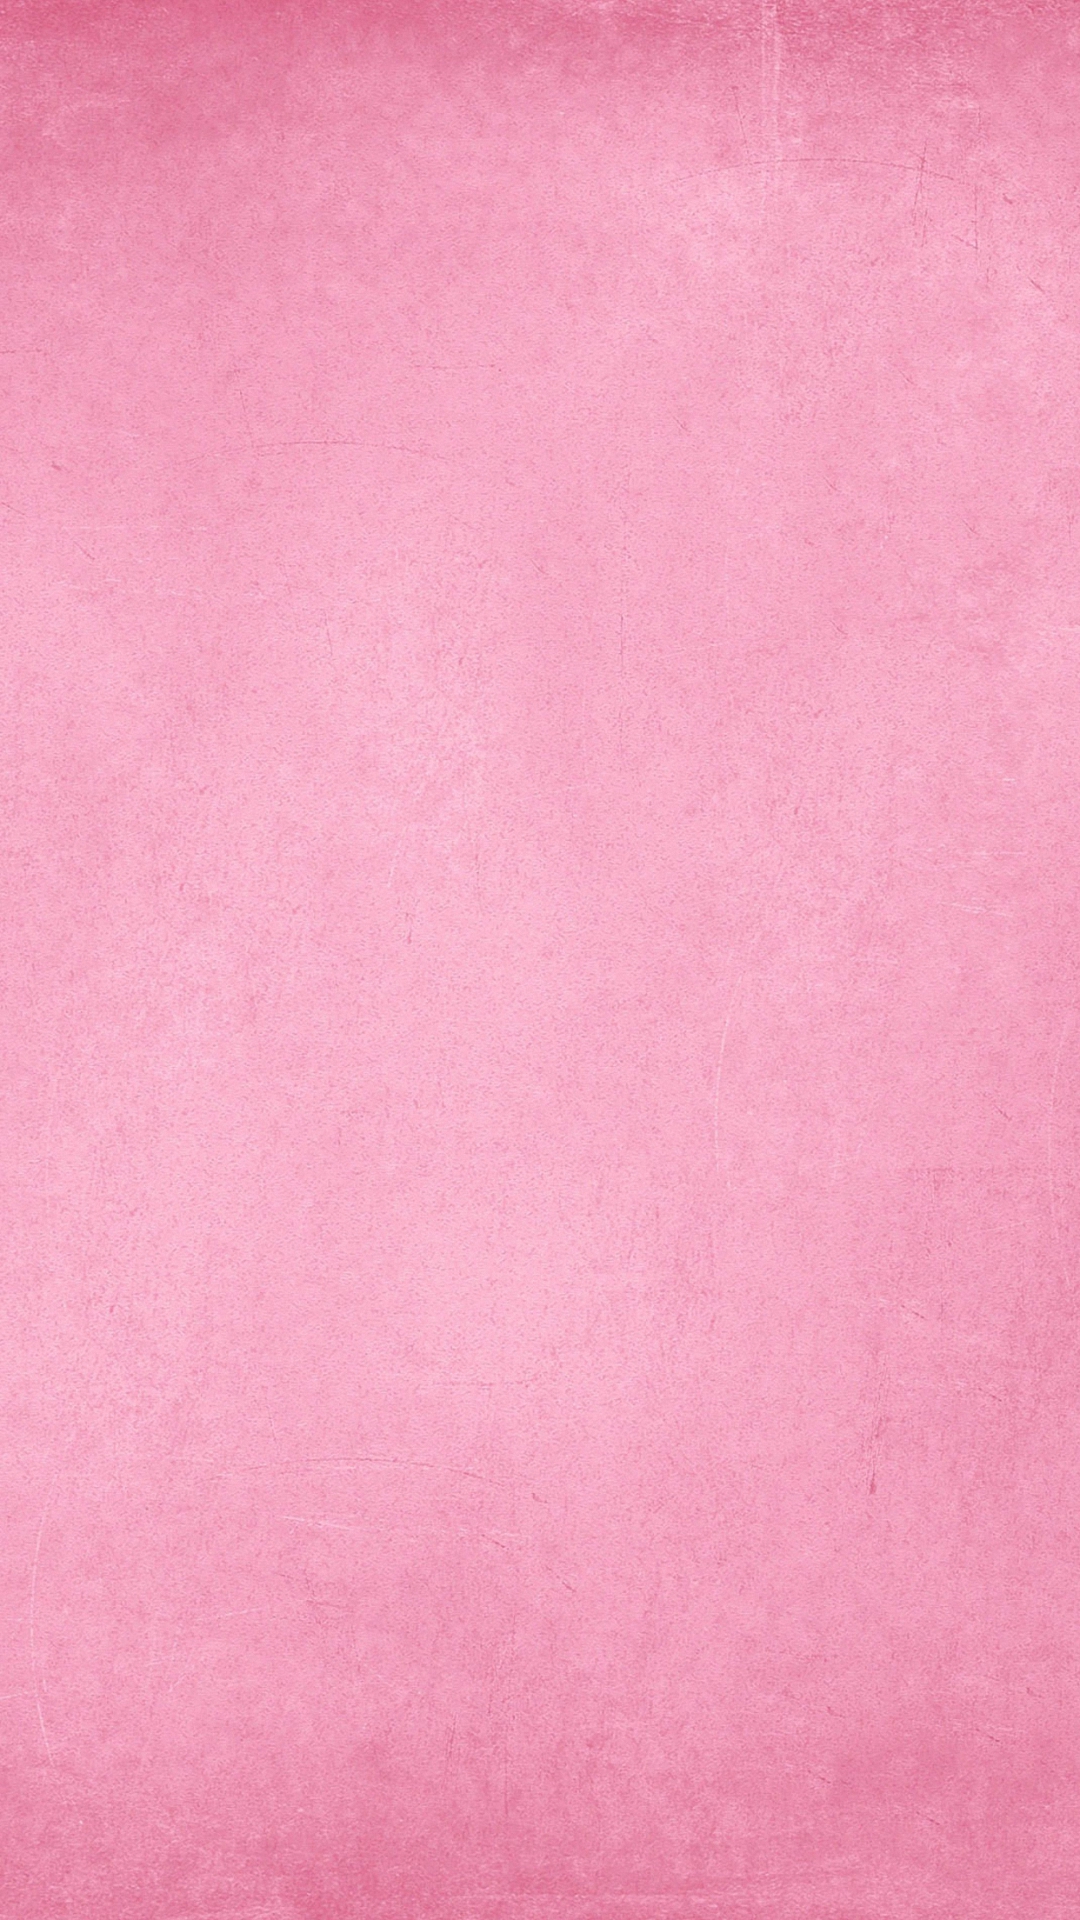 Cool Pink Iphone Wallpapers HD ...